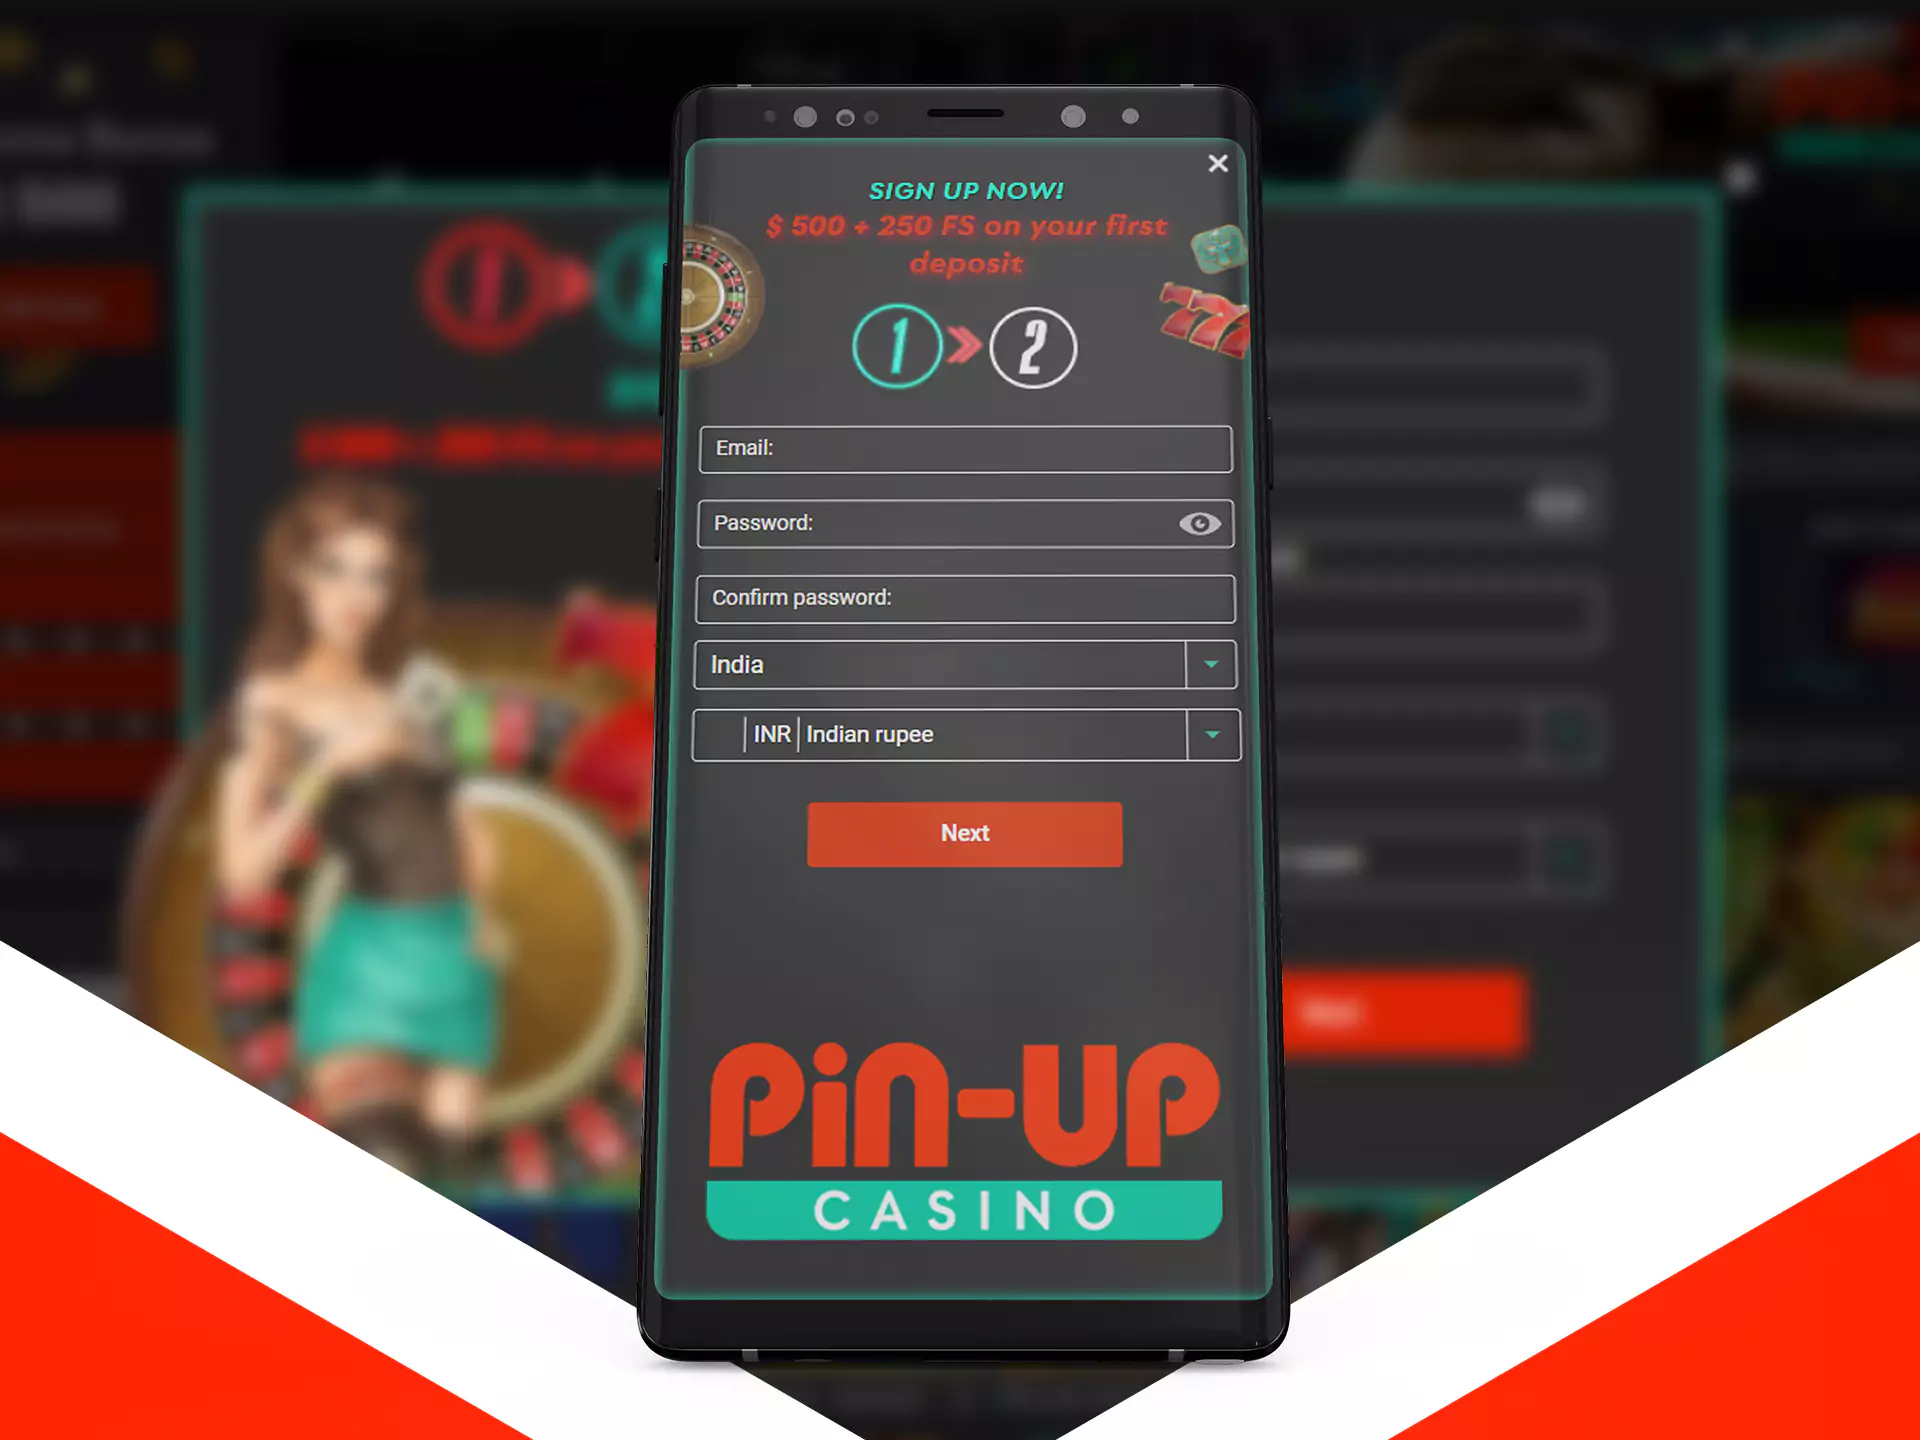 You can sign up for Pin-Up in the app.